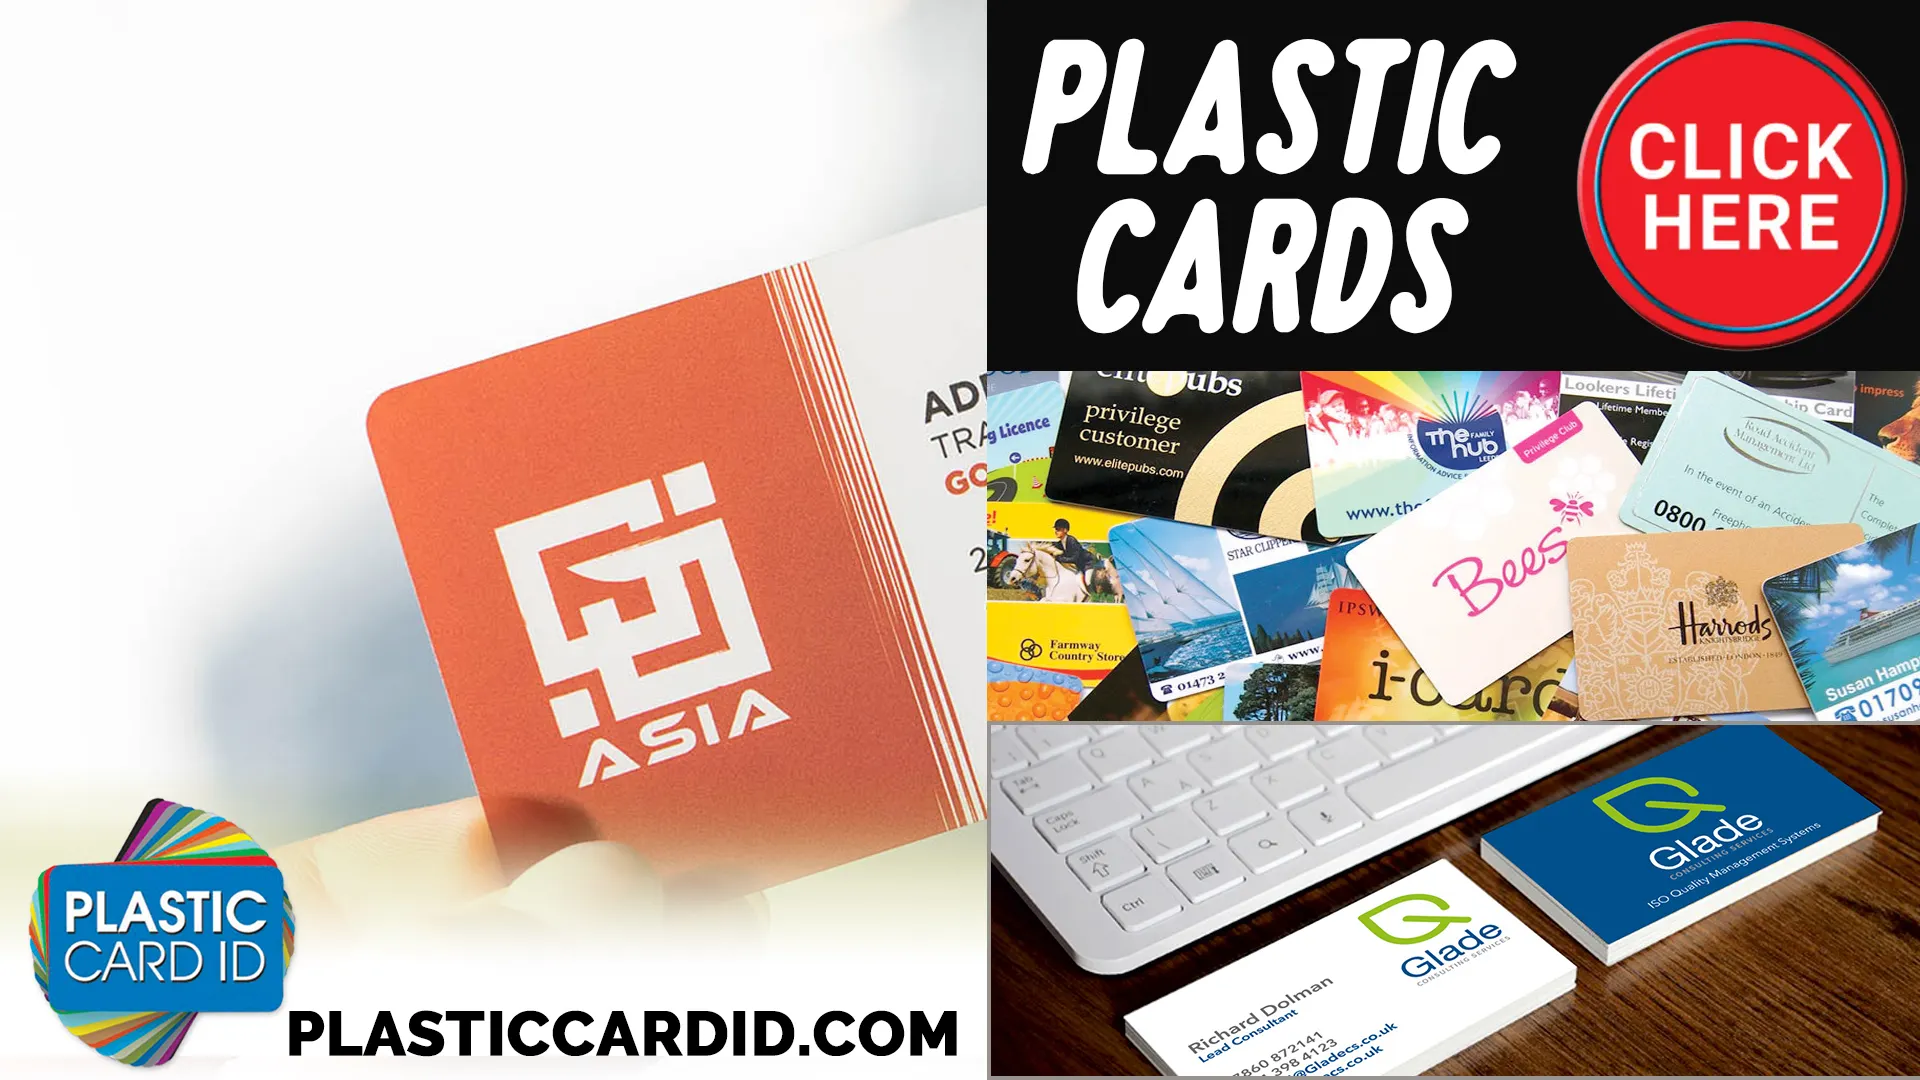 The Journey to Your Perfect Plastic Card Begins Here